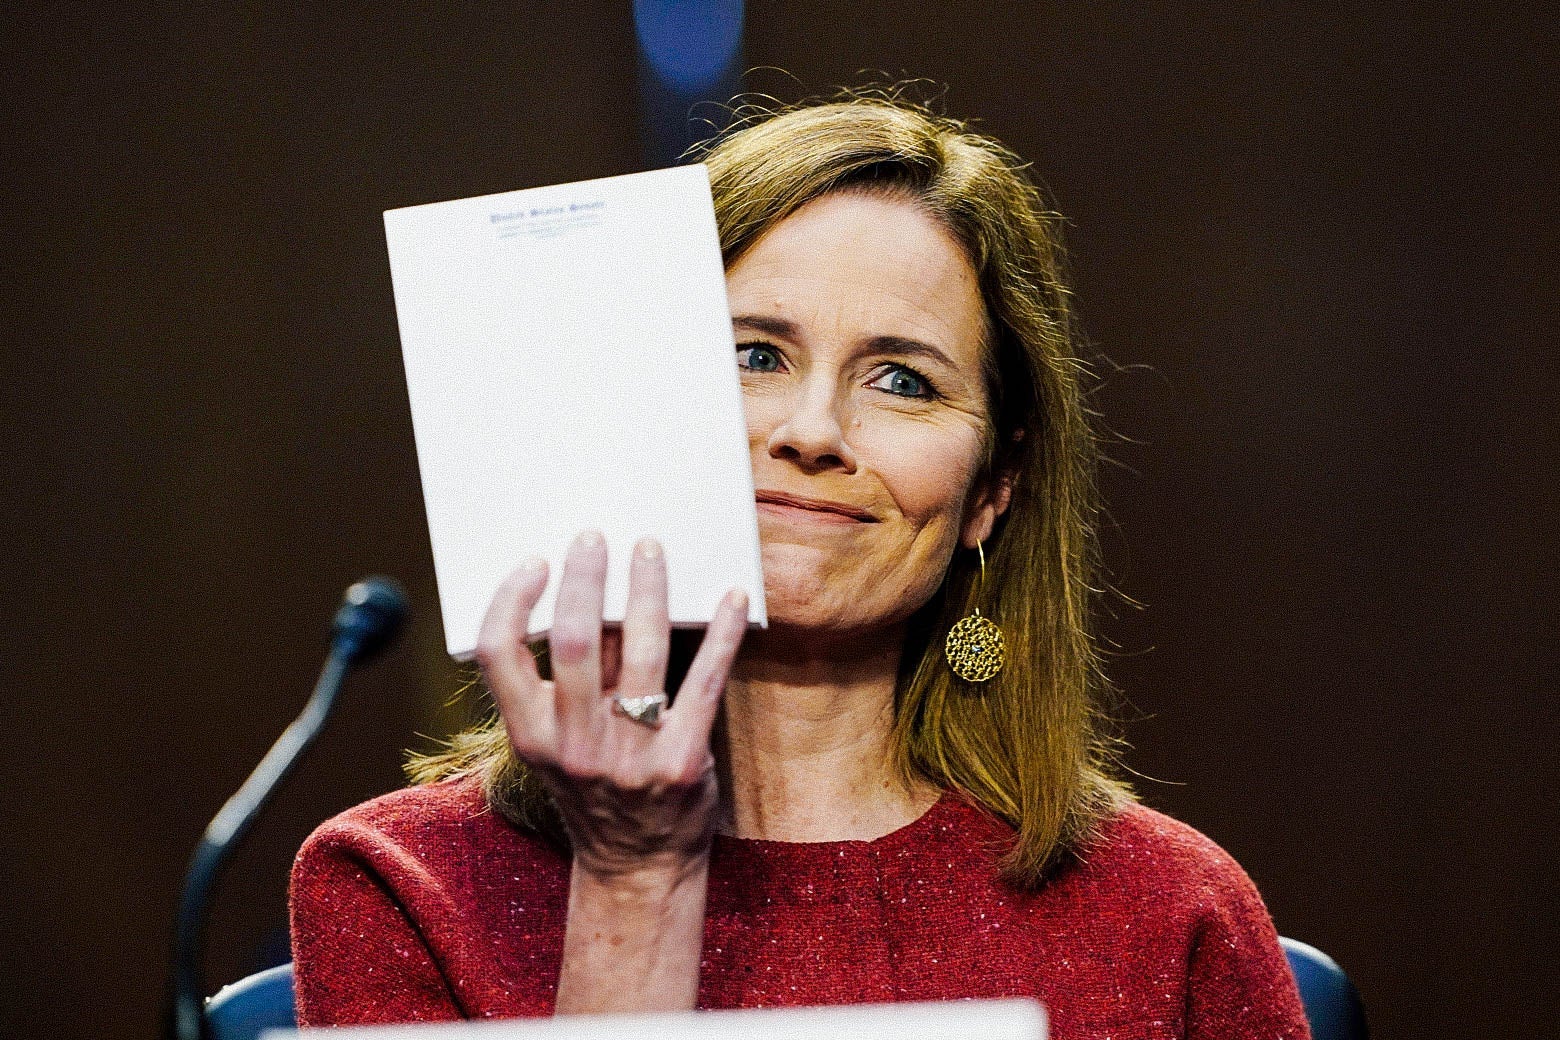 A white woman in a red sweater holds up a blank notepad and smirks.